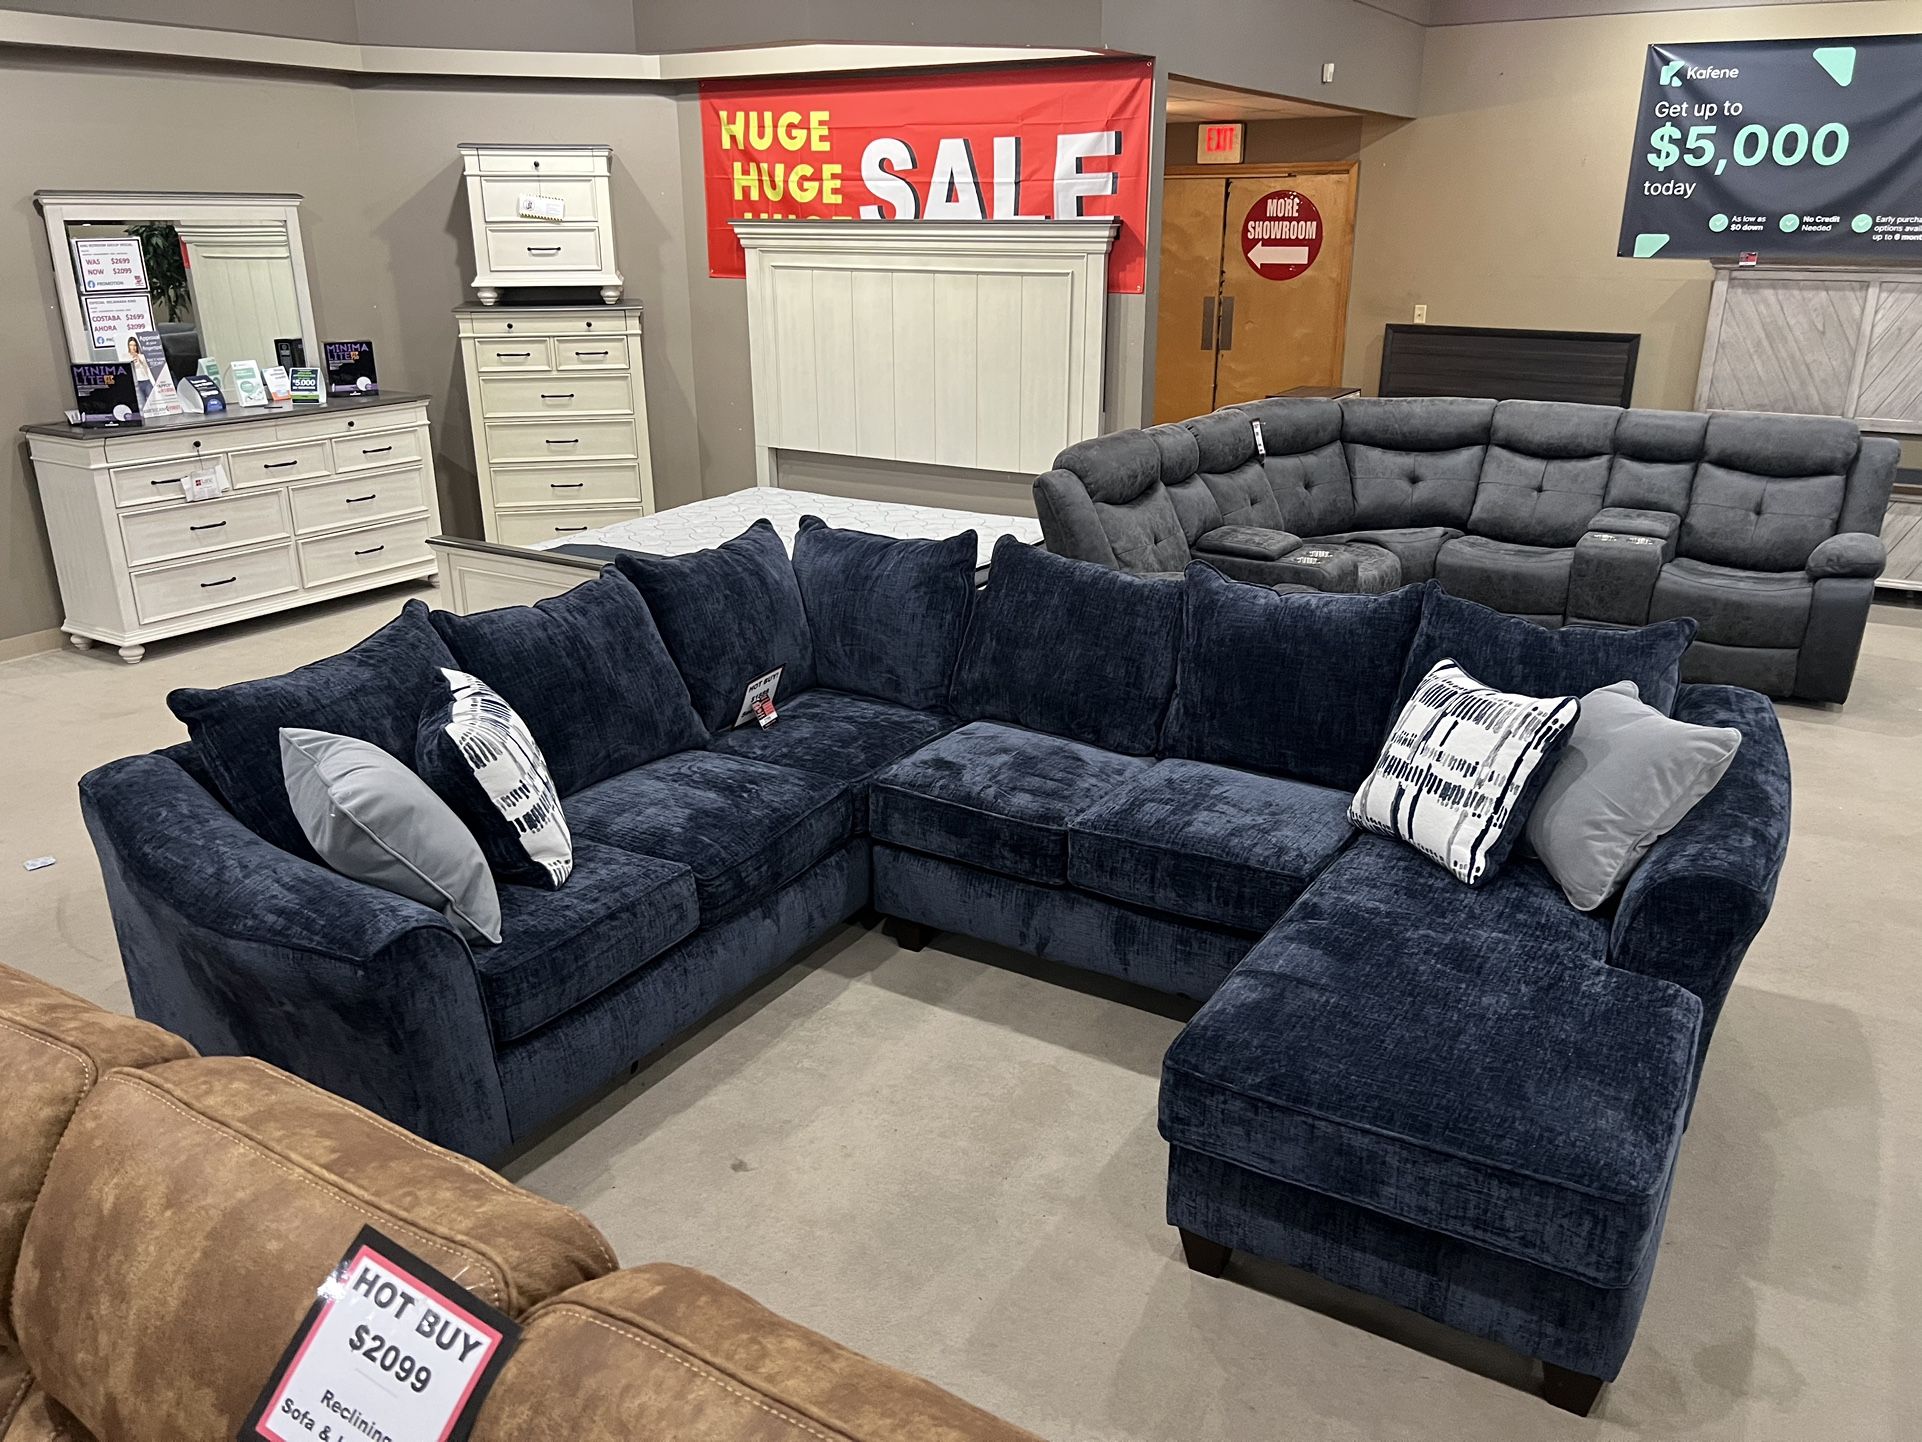 💥BLOWOUT SALE!💥 Brand New Sectional W/ Reversible Chaise Only $1399.00!!